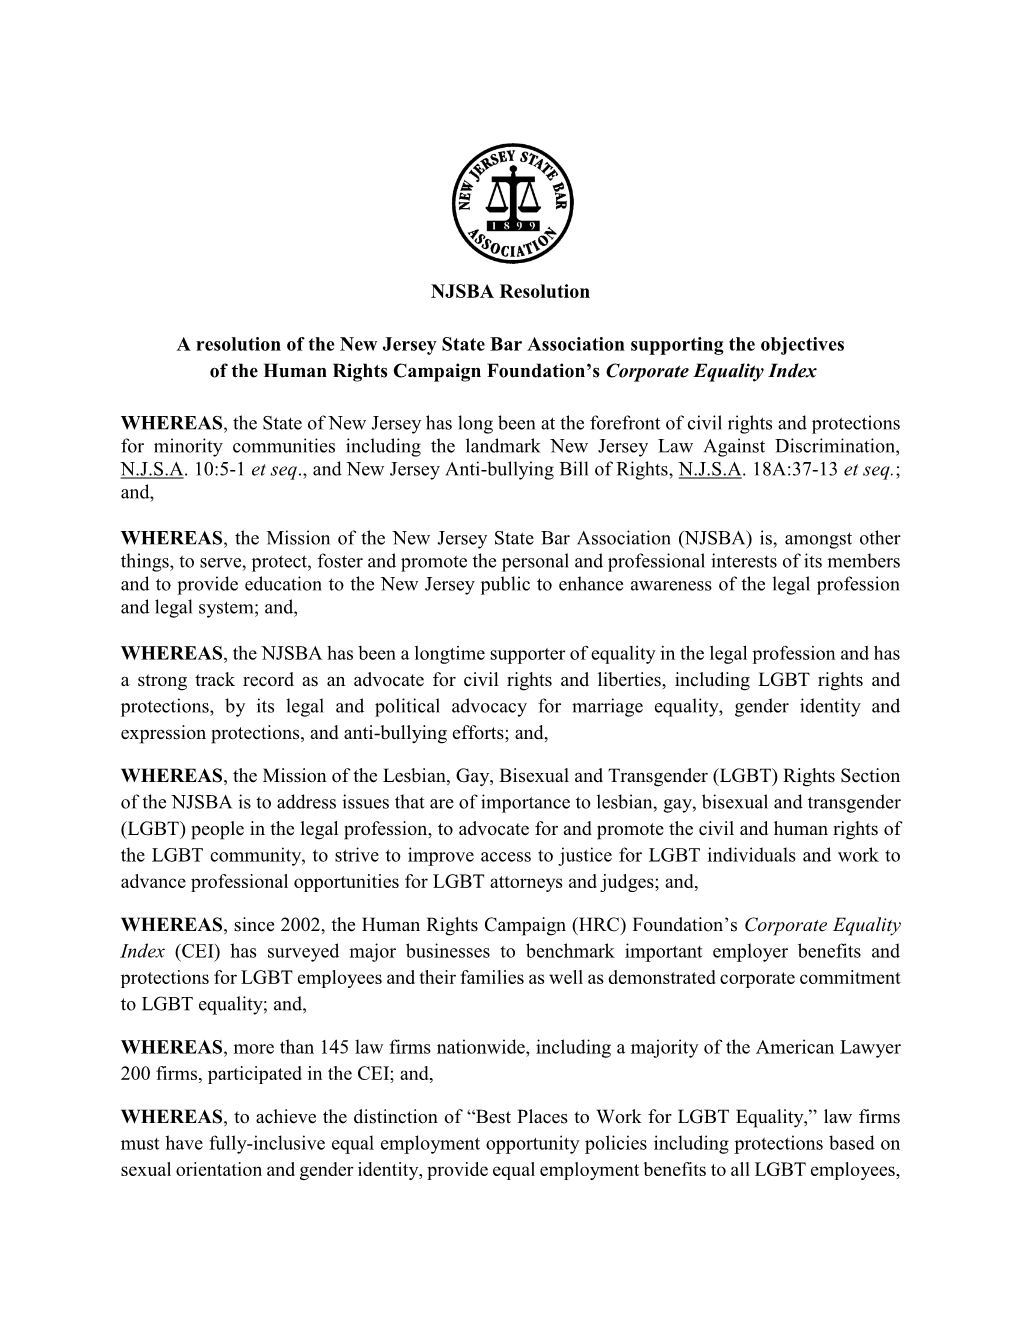 NJSBA Resolution Supporting the Objectives of the Human Rights